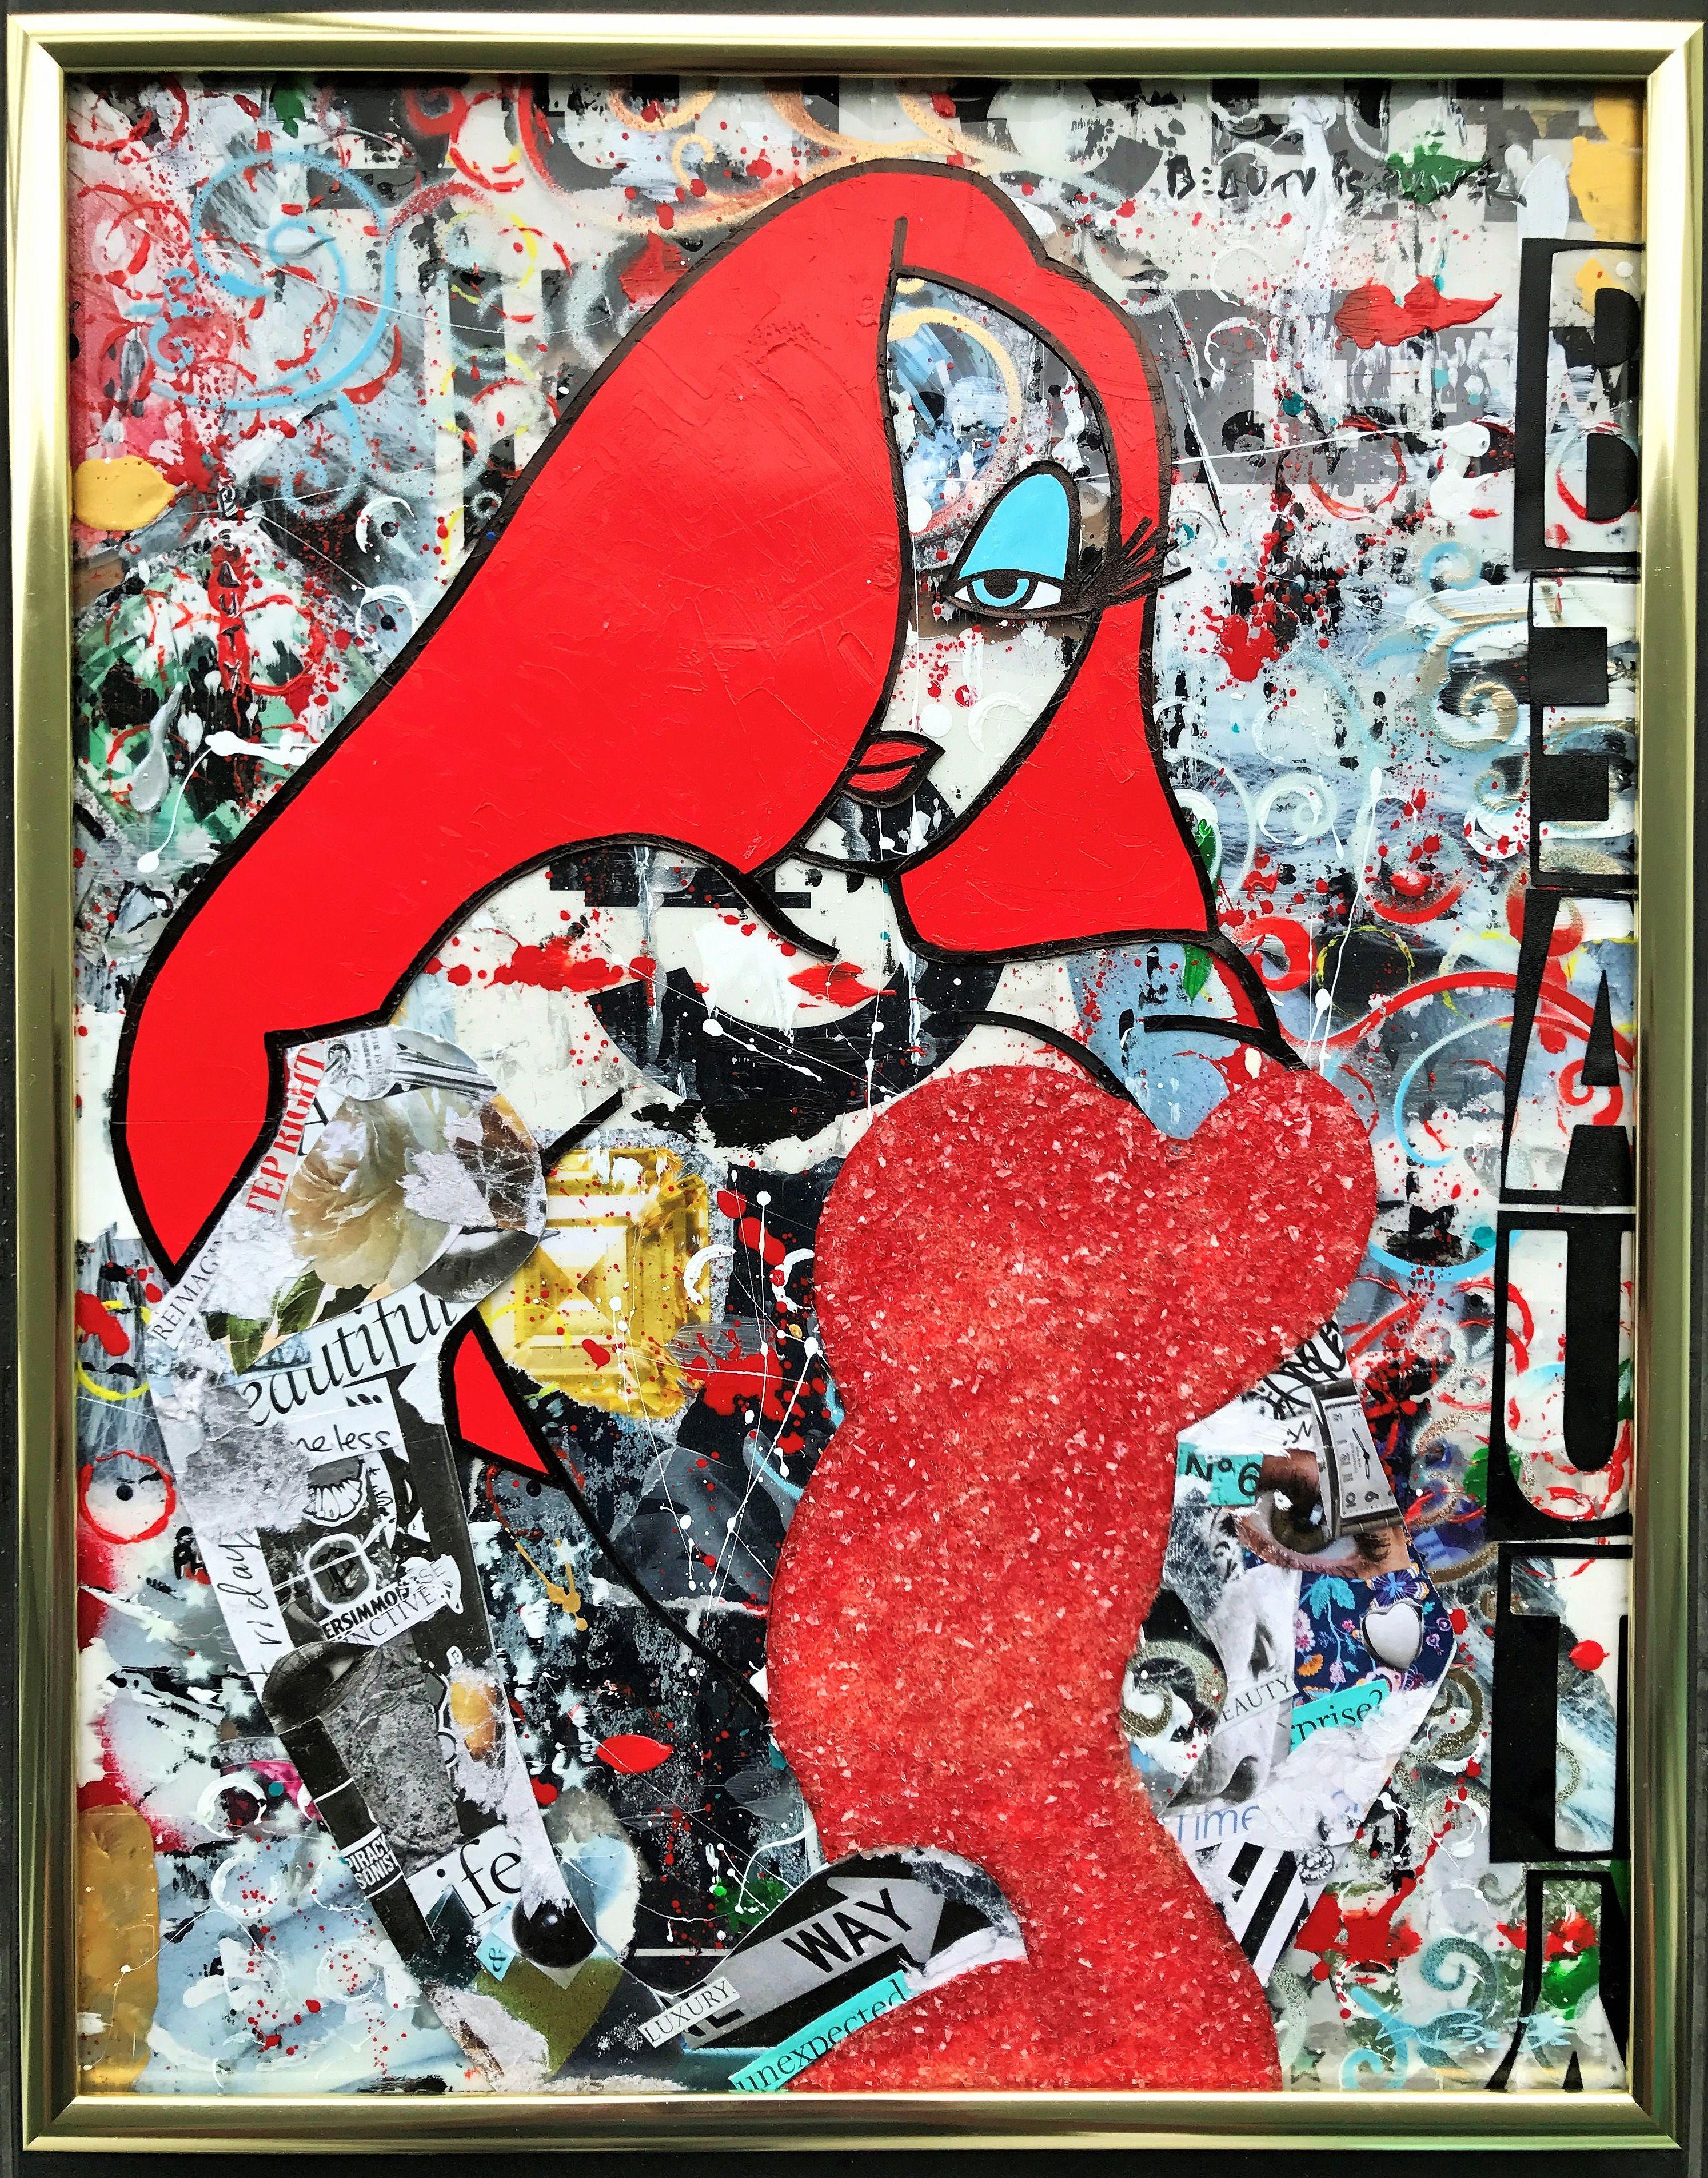 New Beauty - Wynwood Series, Mixed Media on Other - Pop Art Mixed Media Art by Greg Beebe